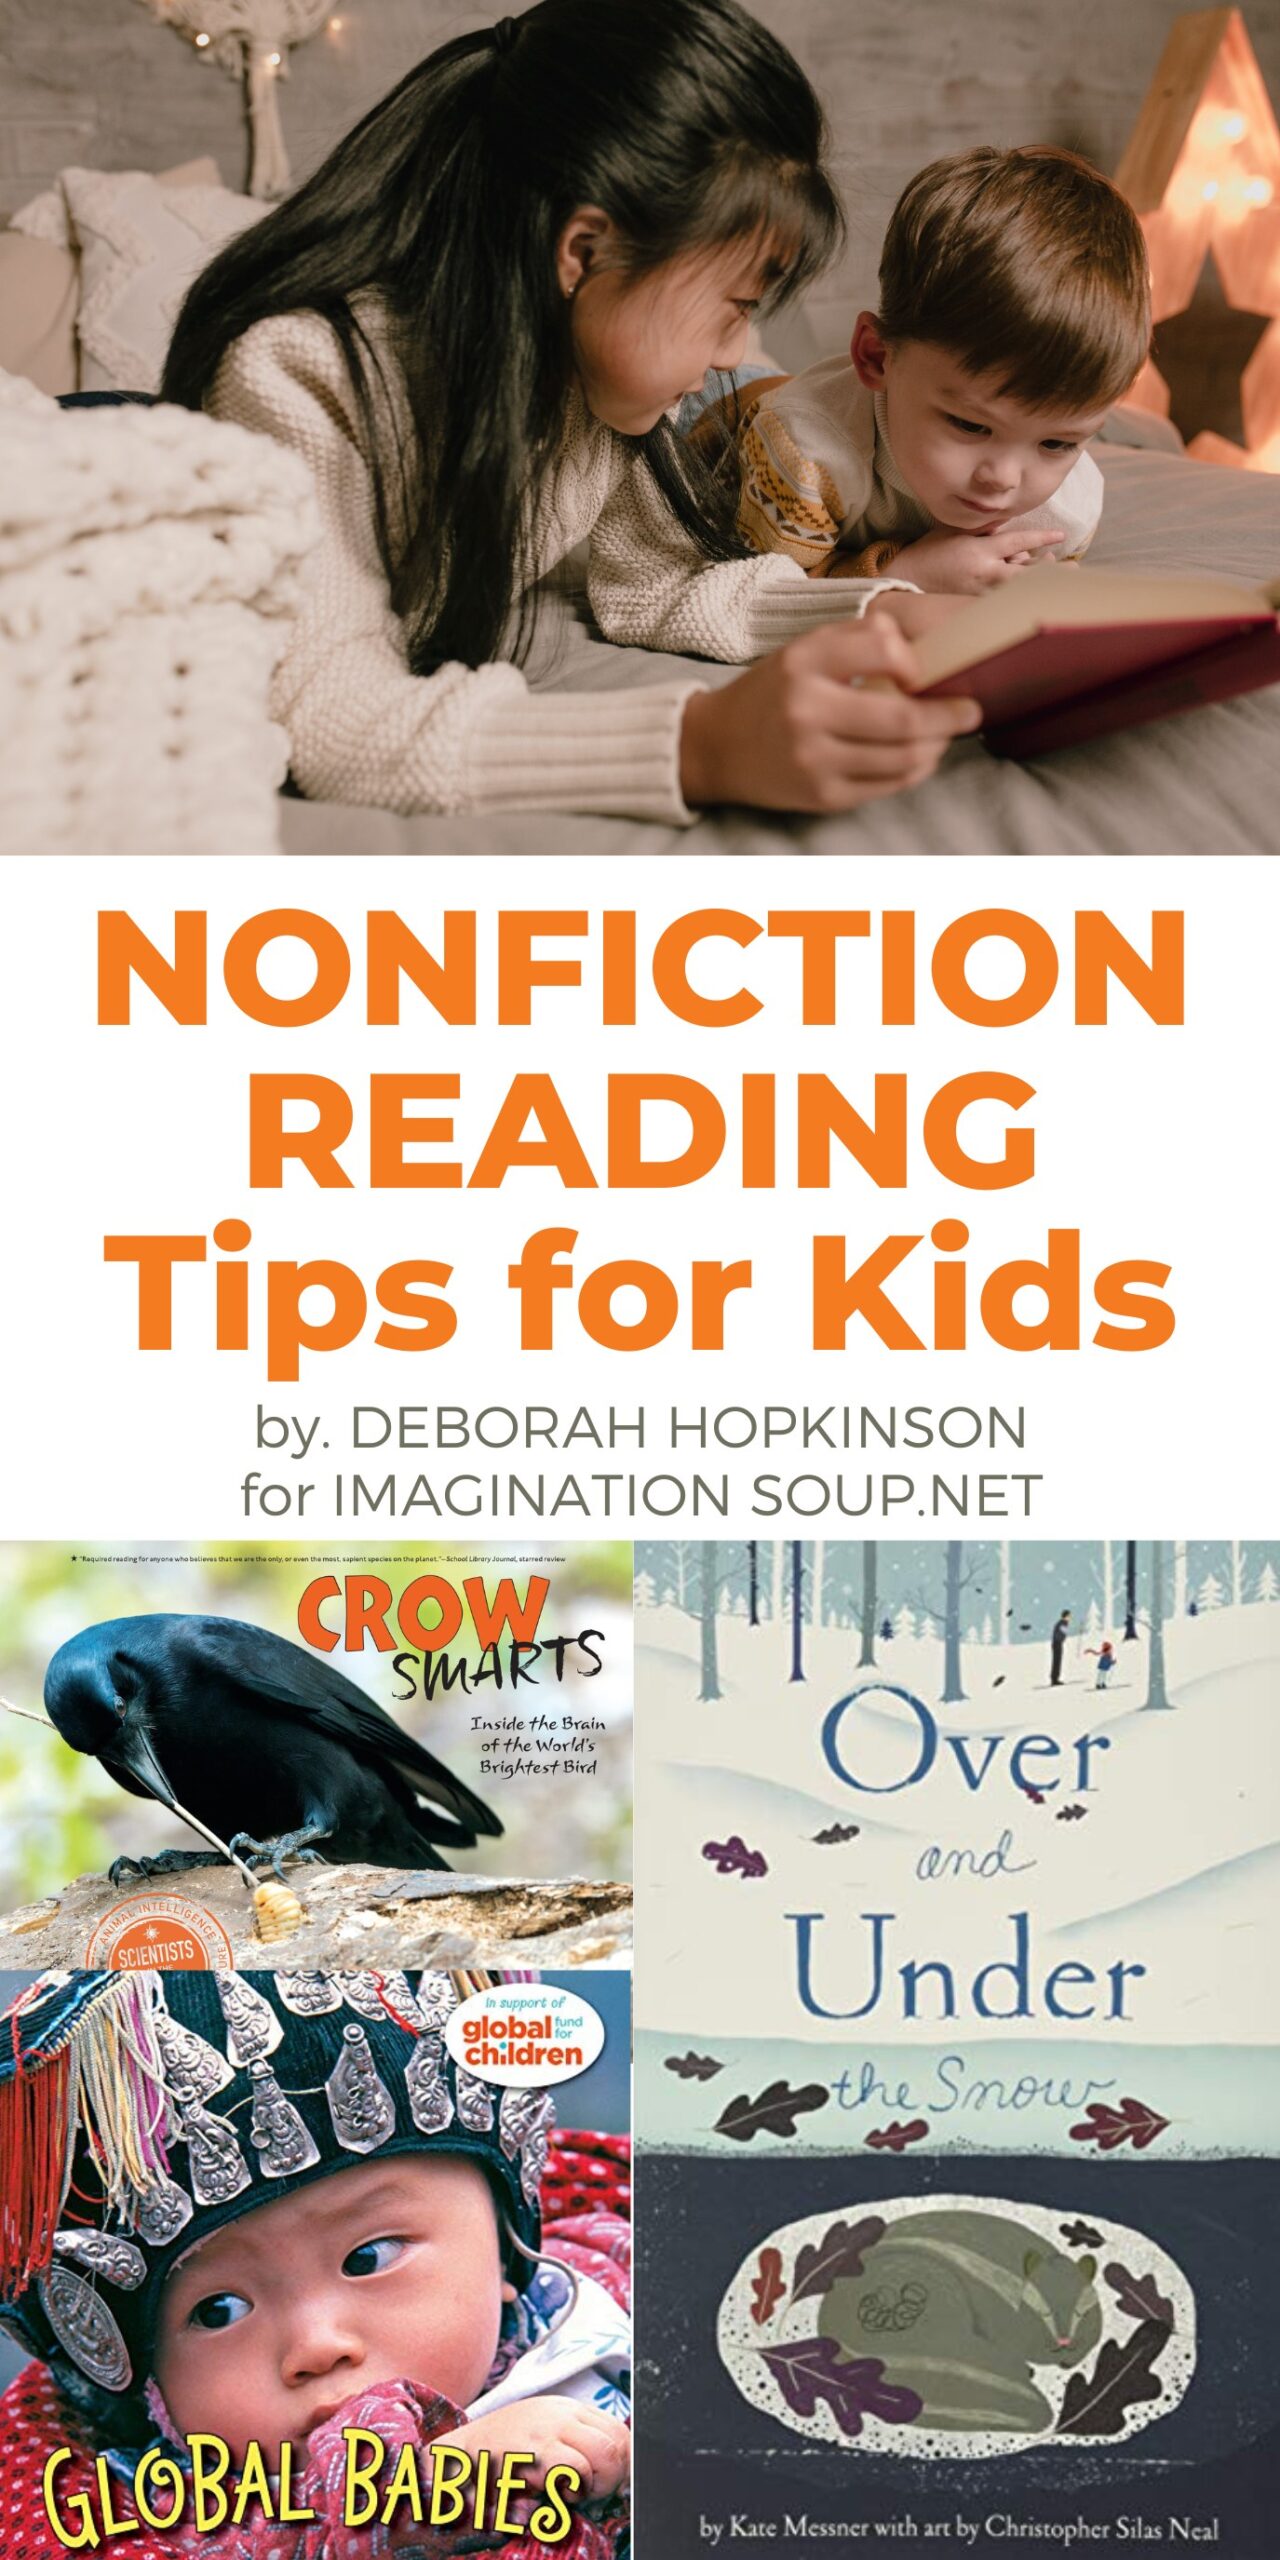 nonfiction reading tips for kids